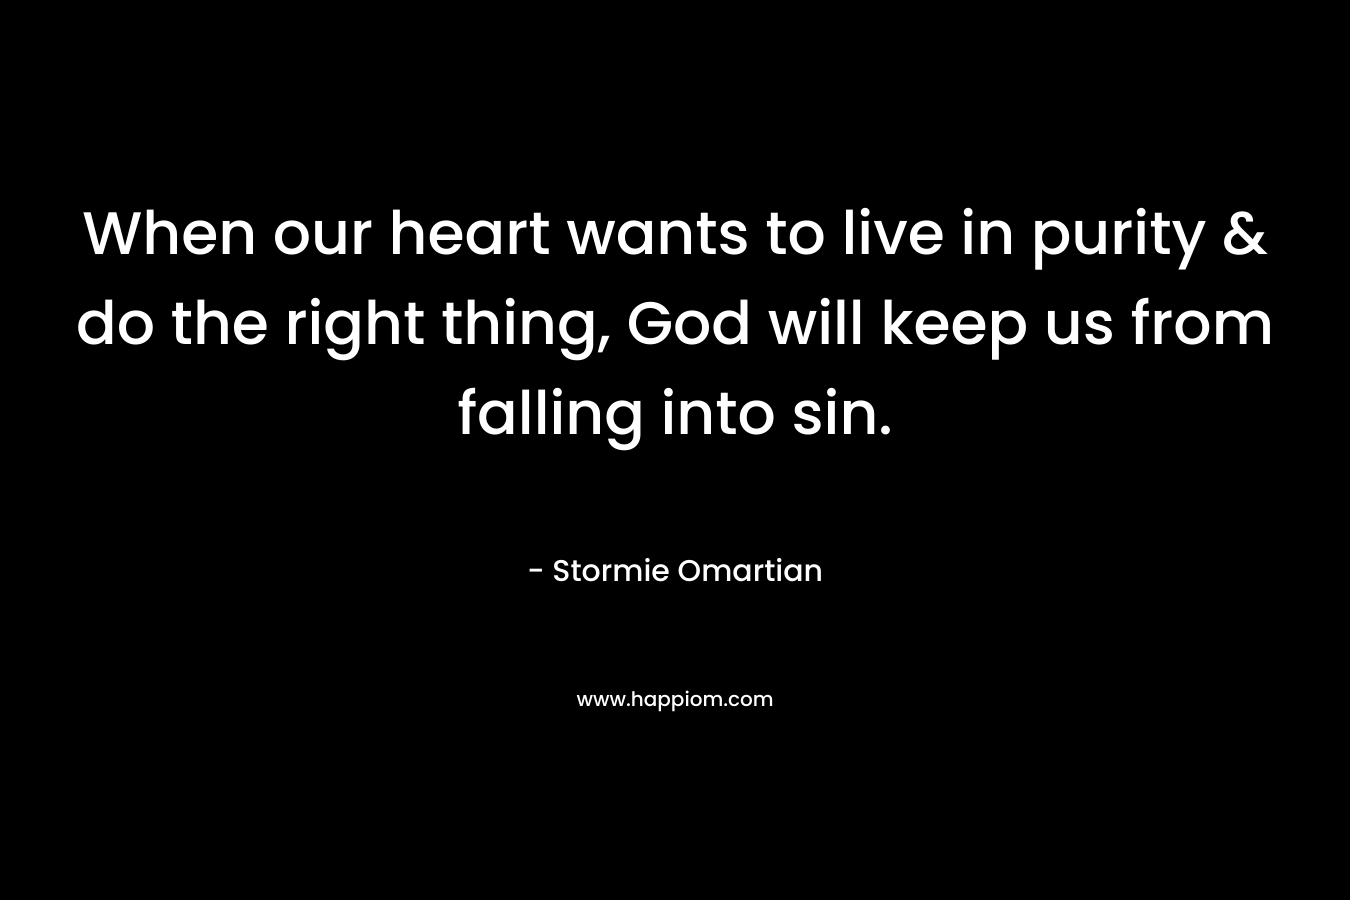 When our heart wants to live in purity & do the right thing, God will keep us from falling into sin. – Stormie Omartian